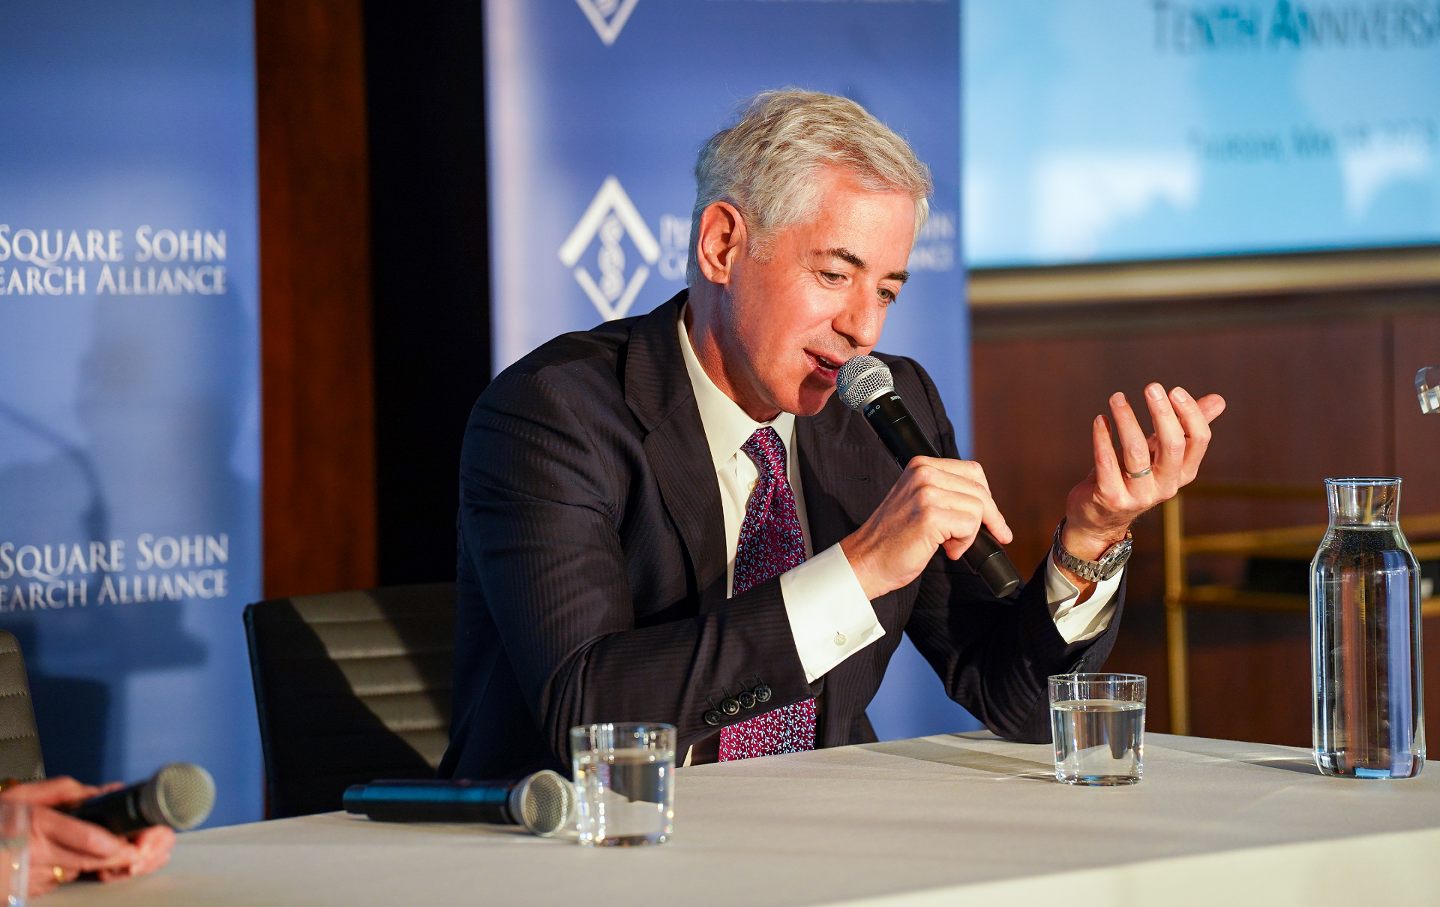 William A. Ackman attends the Pershing Square Sohn Prize 2023 Award and Tenth Anniversary Dinner at Manhatta on May 18, 2023, in New York City.